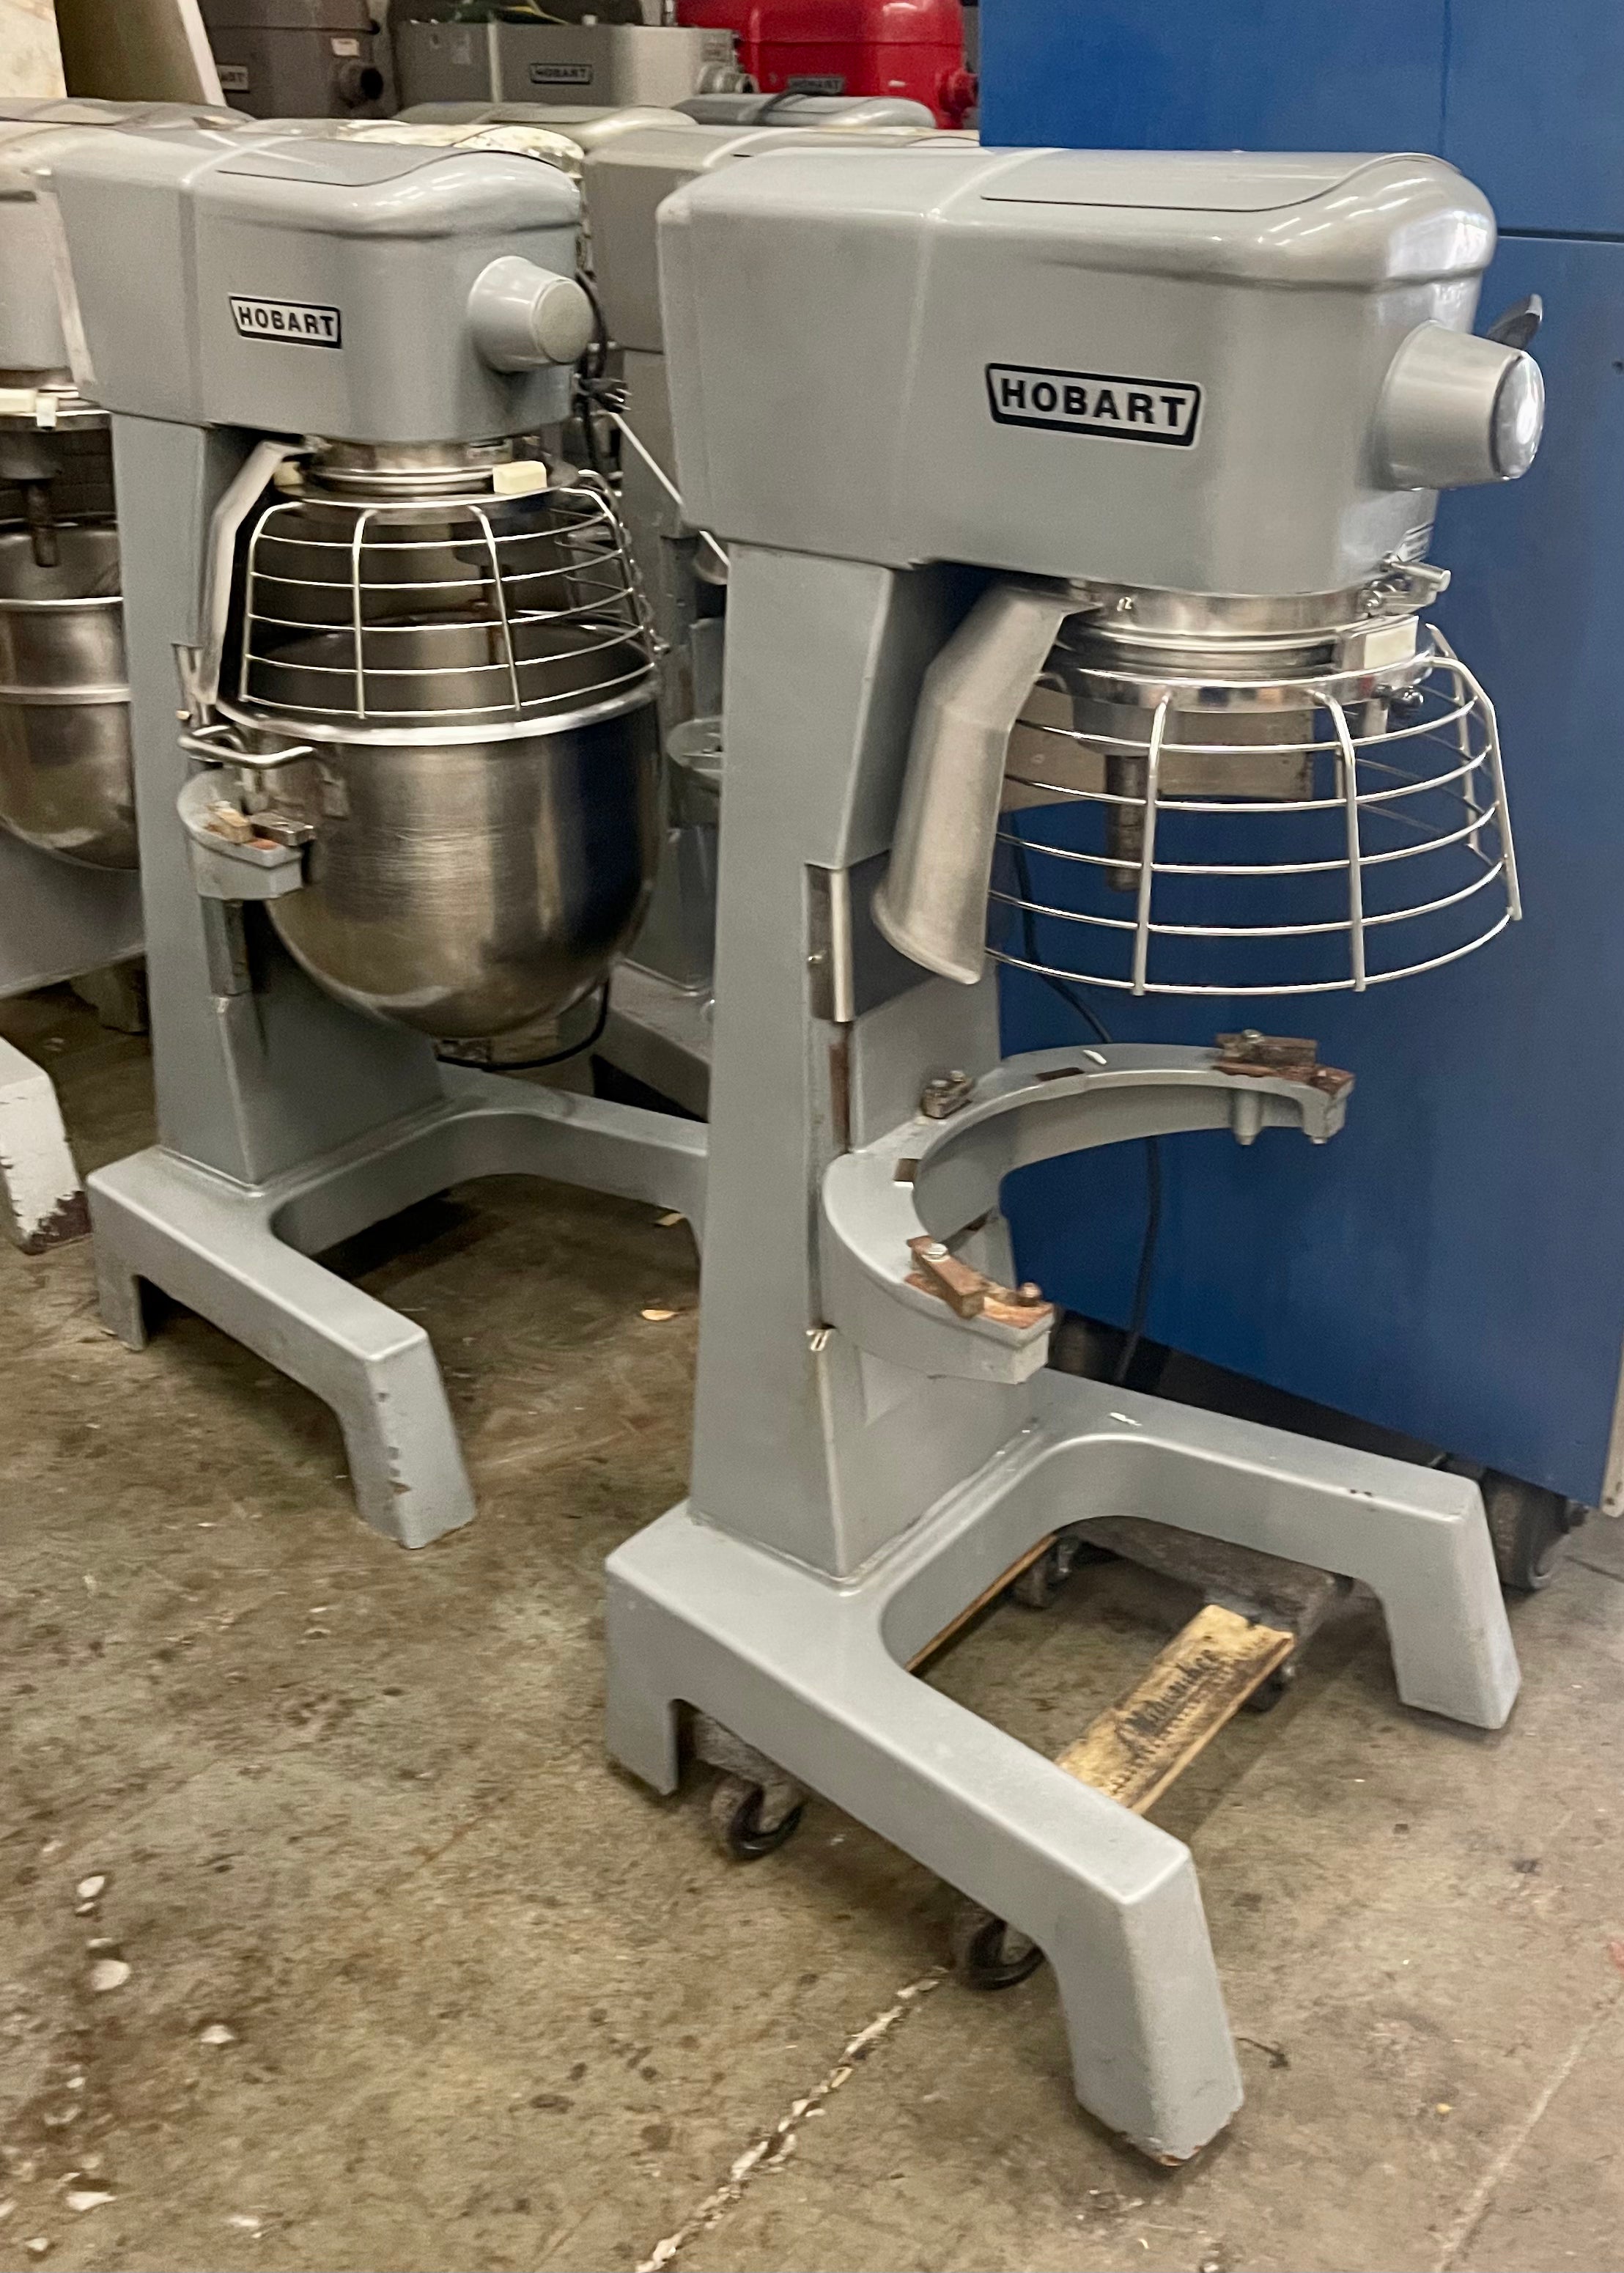 Hobart D300t 30 quart mixer 115V comes with a stainless steel bowl and —  Palm Beach Restaurant Equipment